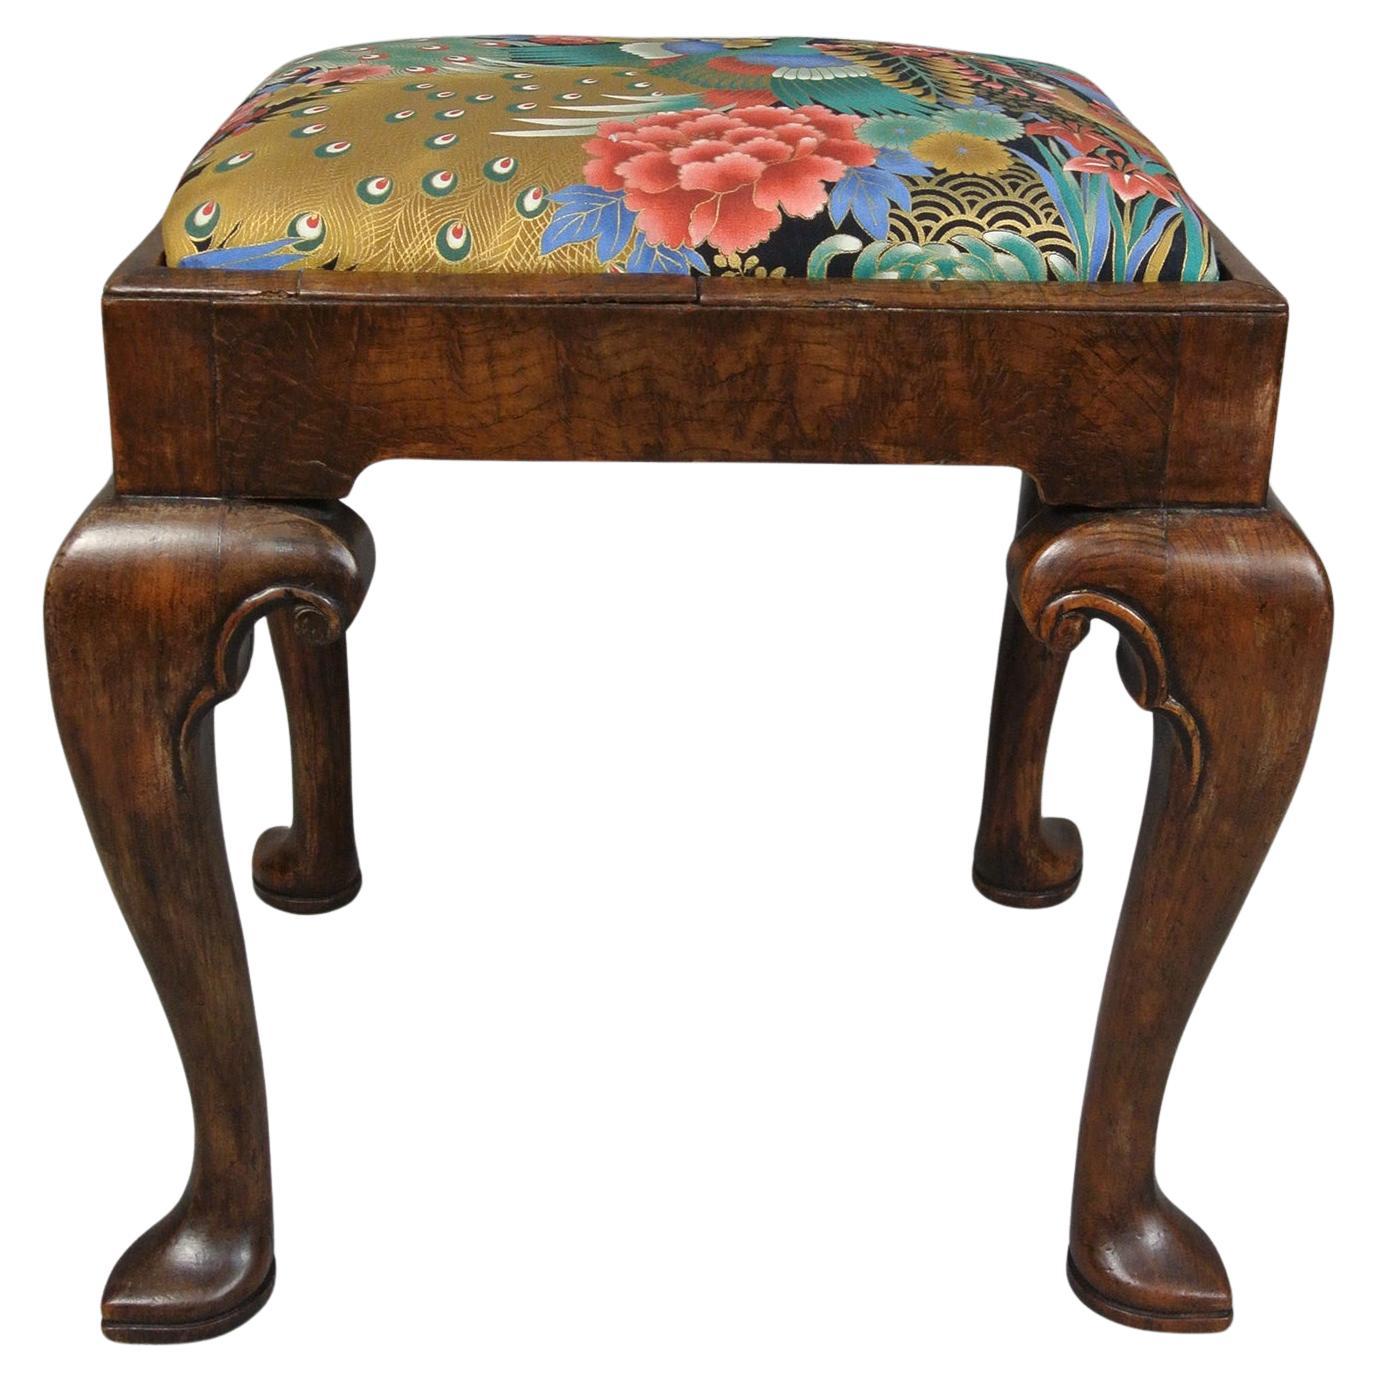 Tall and Handsome George II Walnut Stool with Slipper Feet c. 1750